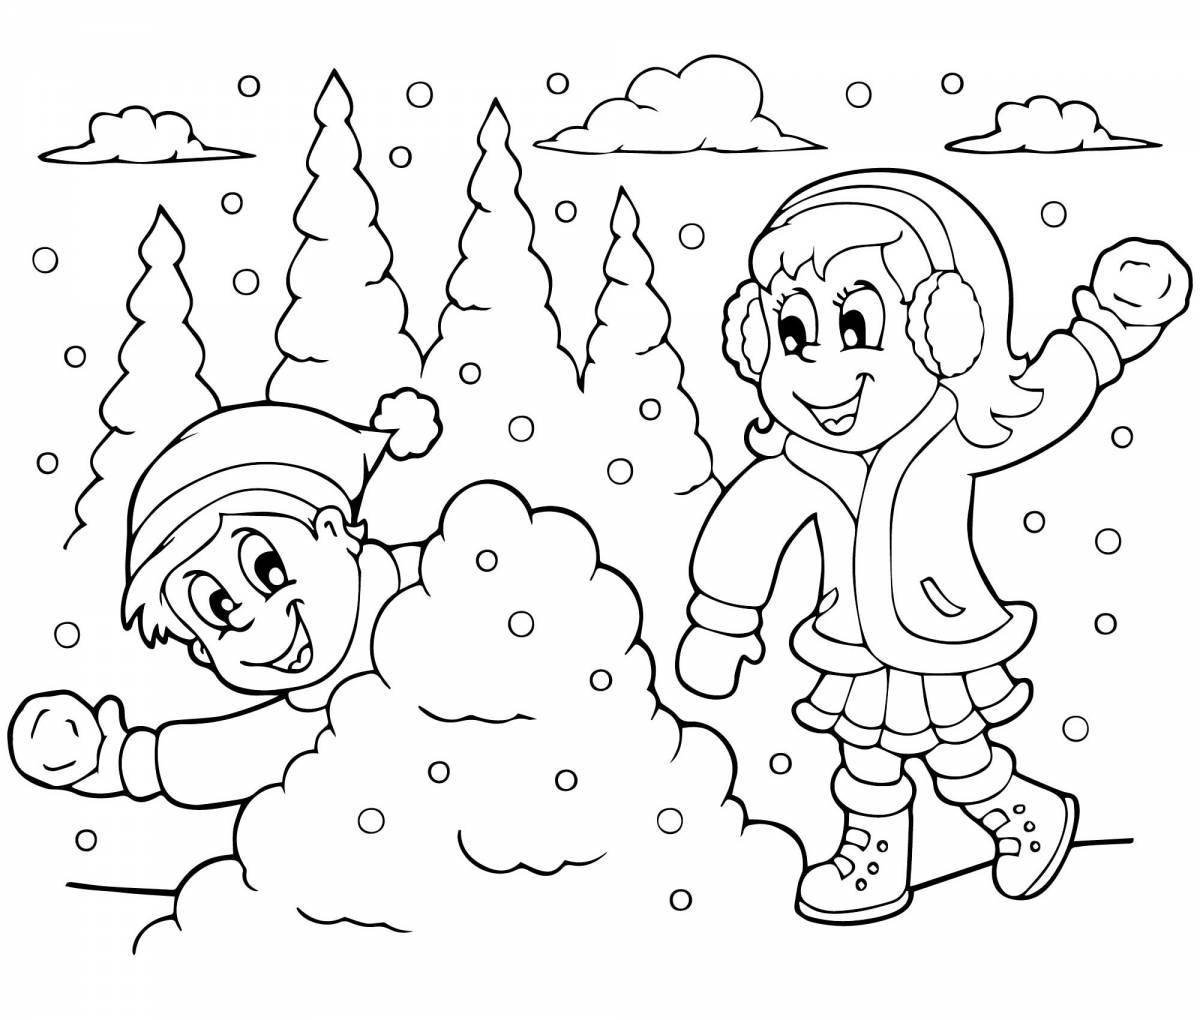 Whimsical winter coloring book for kids 6-7 years old